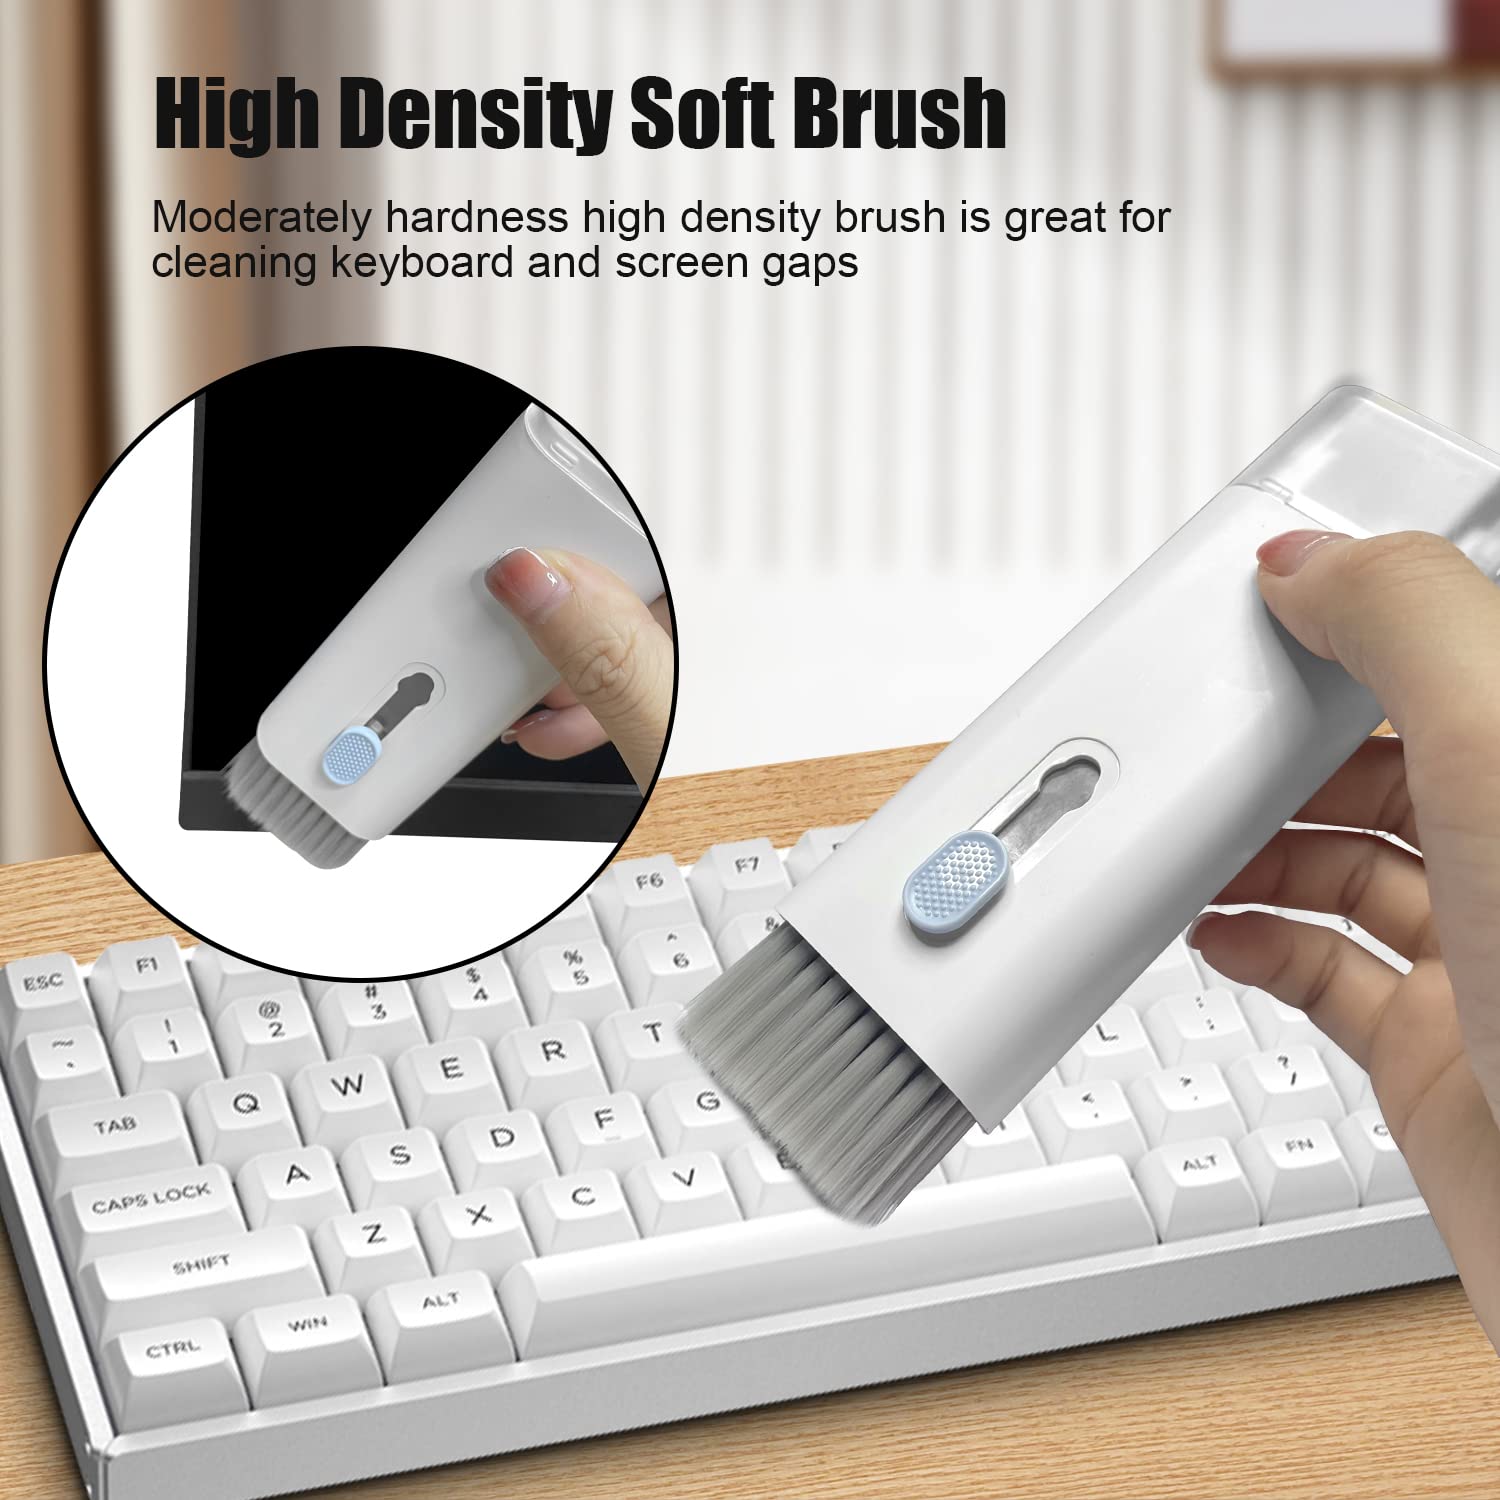 Keyboard cleaning tools